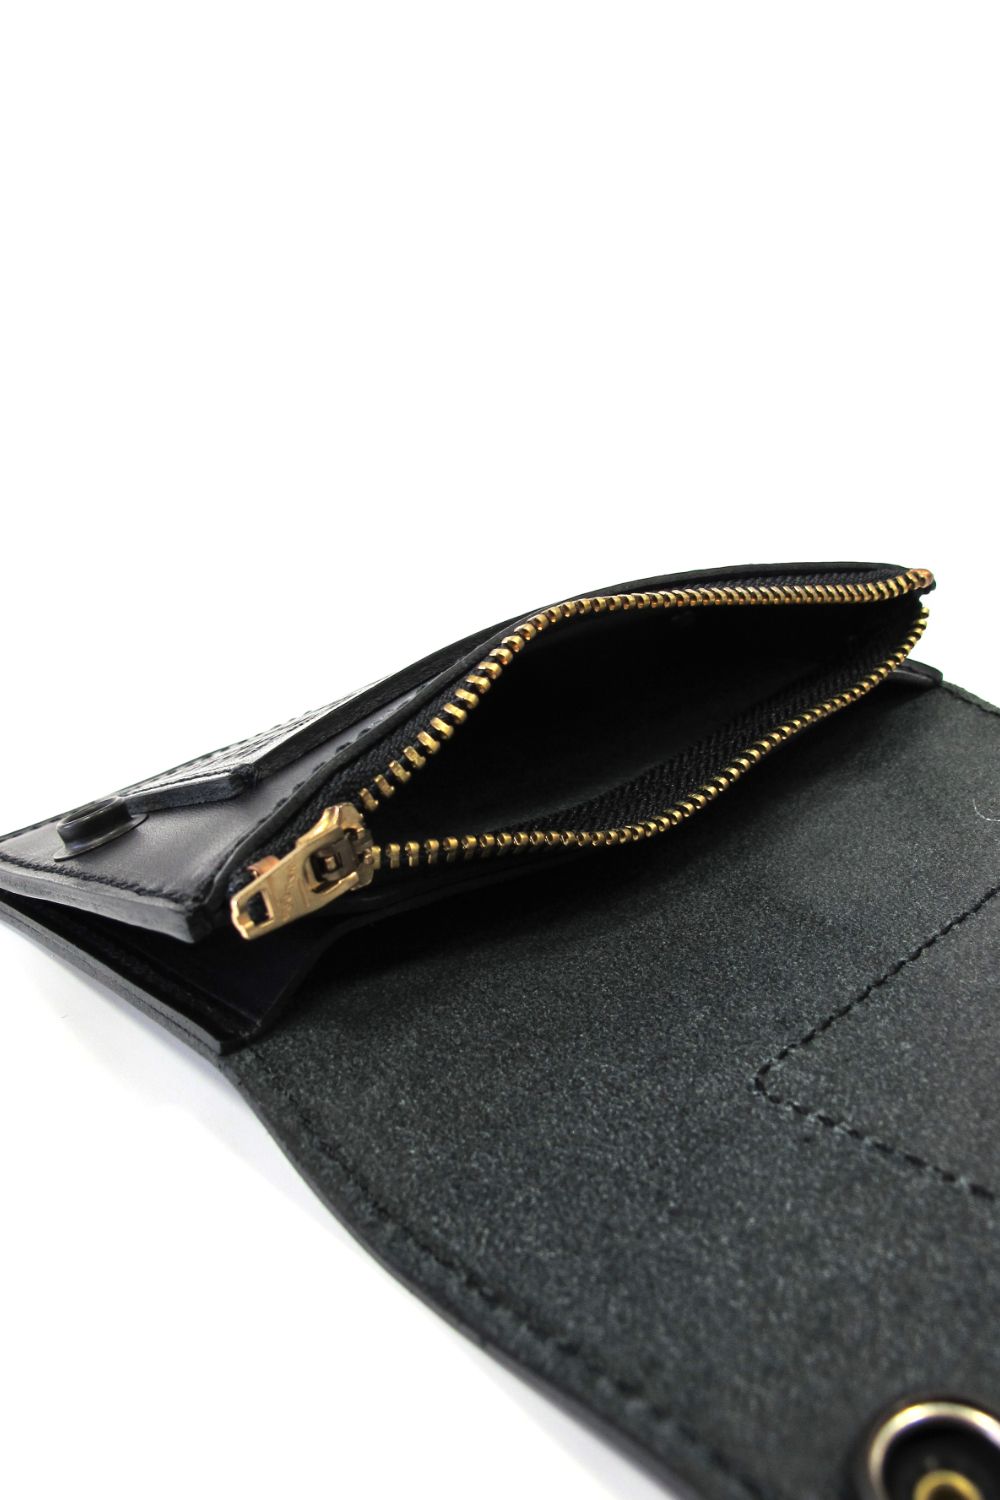 RATS - SHORT LEATHER WALLET (BLACK) / ポーター コラボレザー 